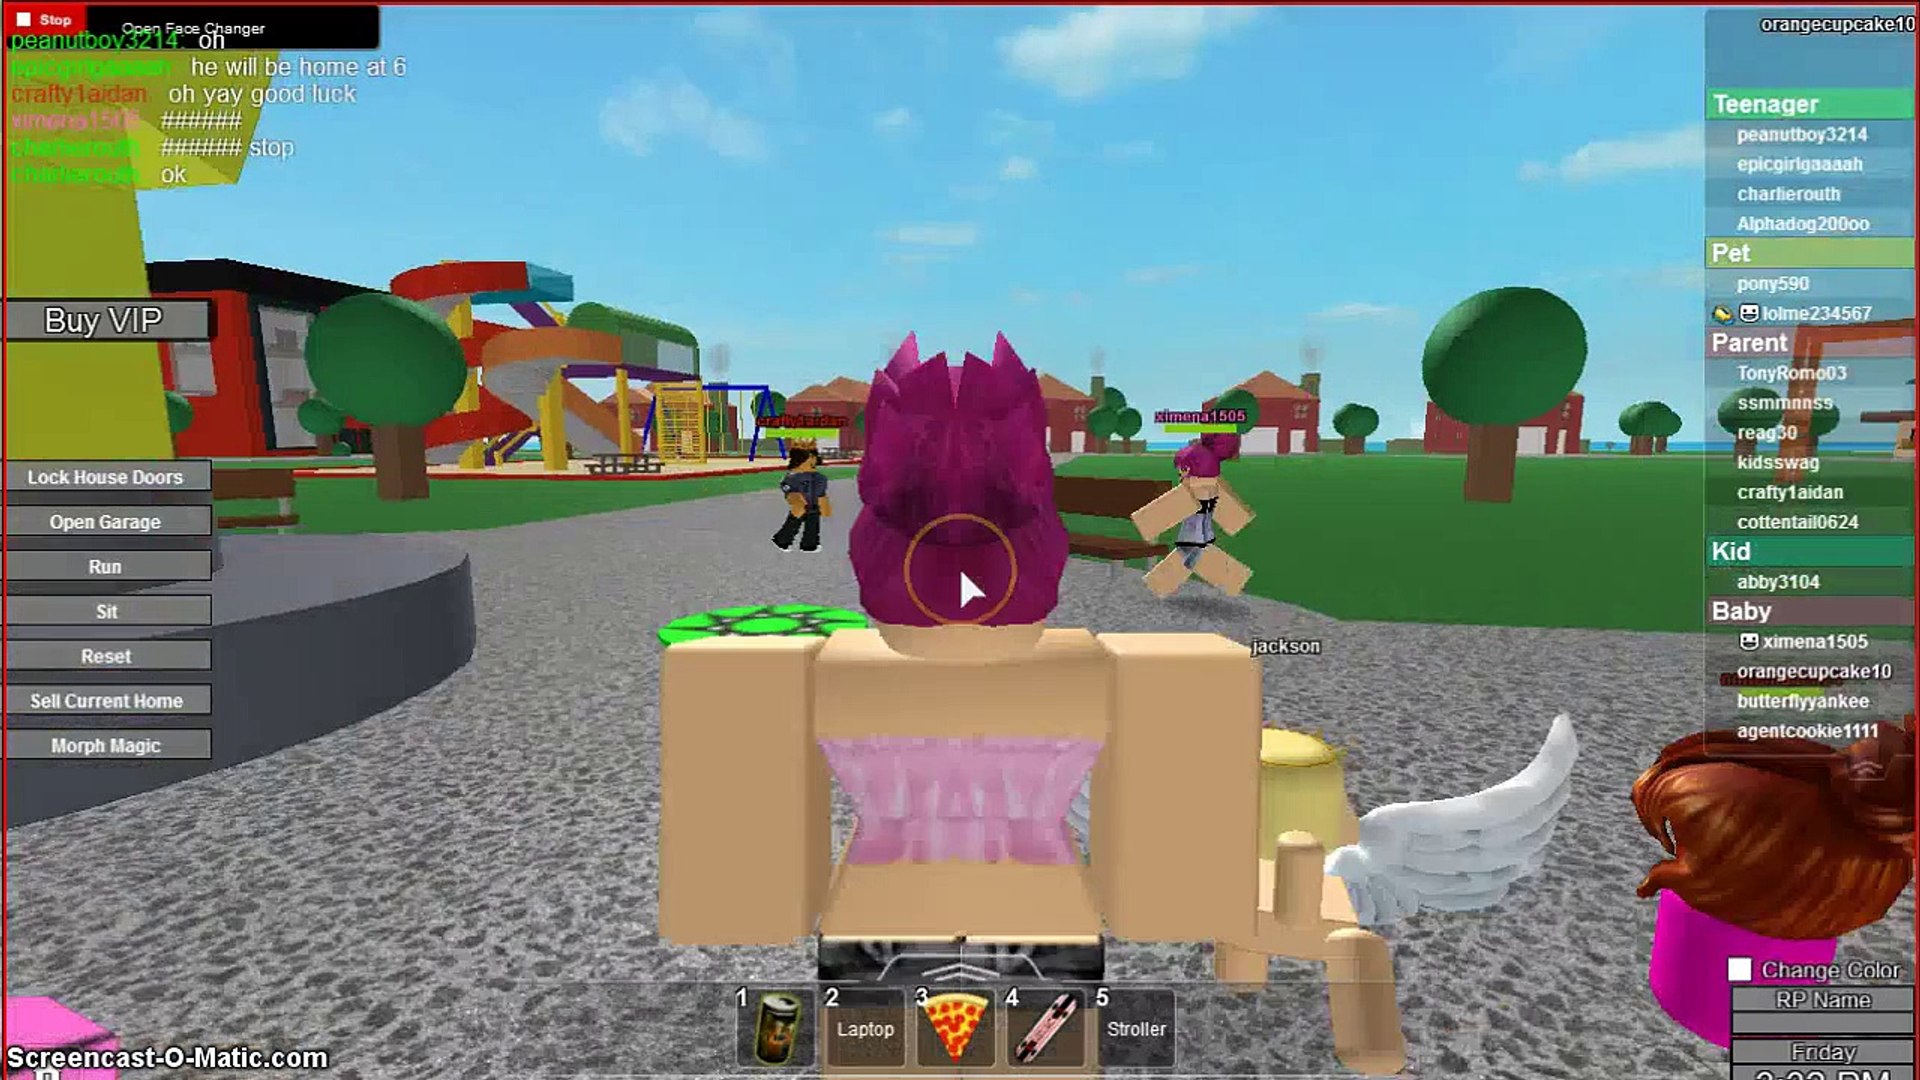 Adopt And Raise A Adorable Baby Roblox With Julieta Video Dailymotion - roblox adopt and raise pets